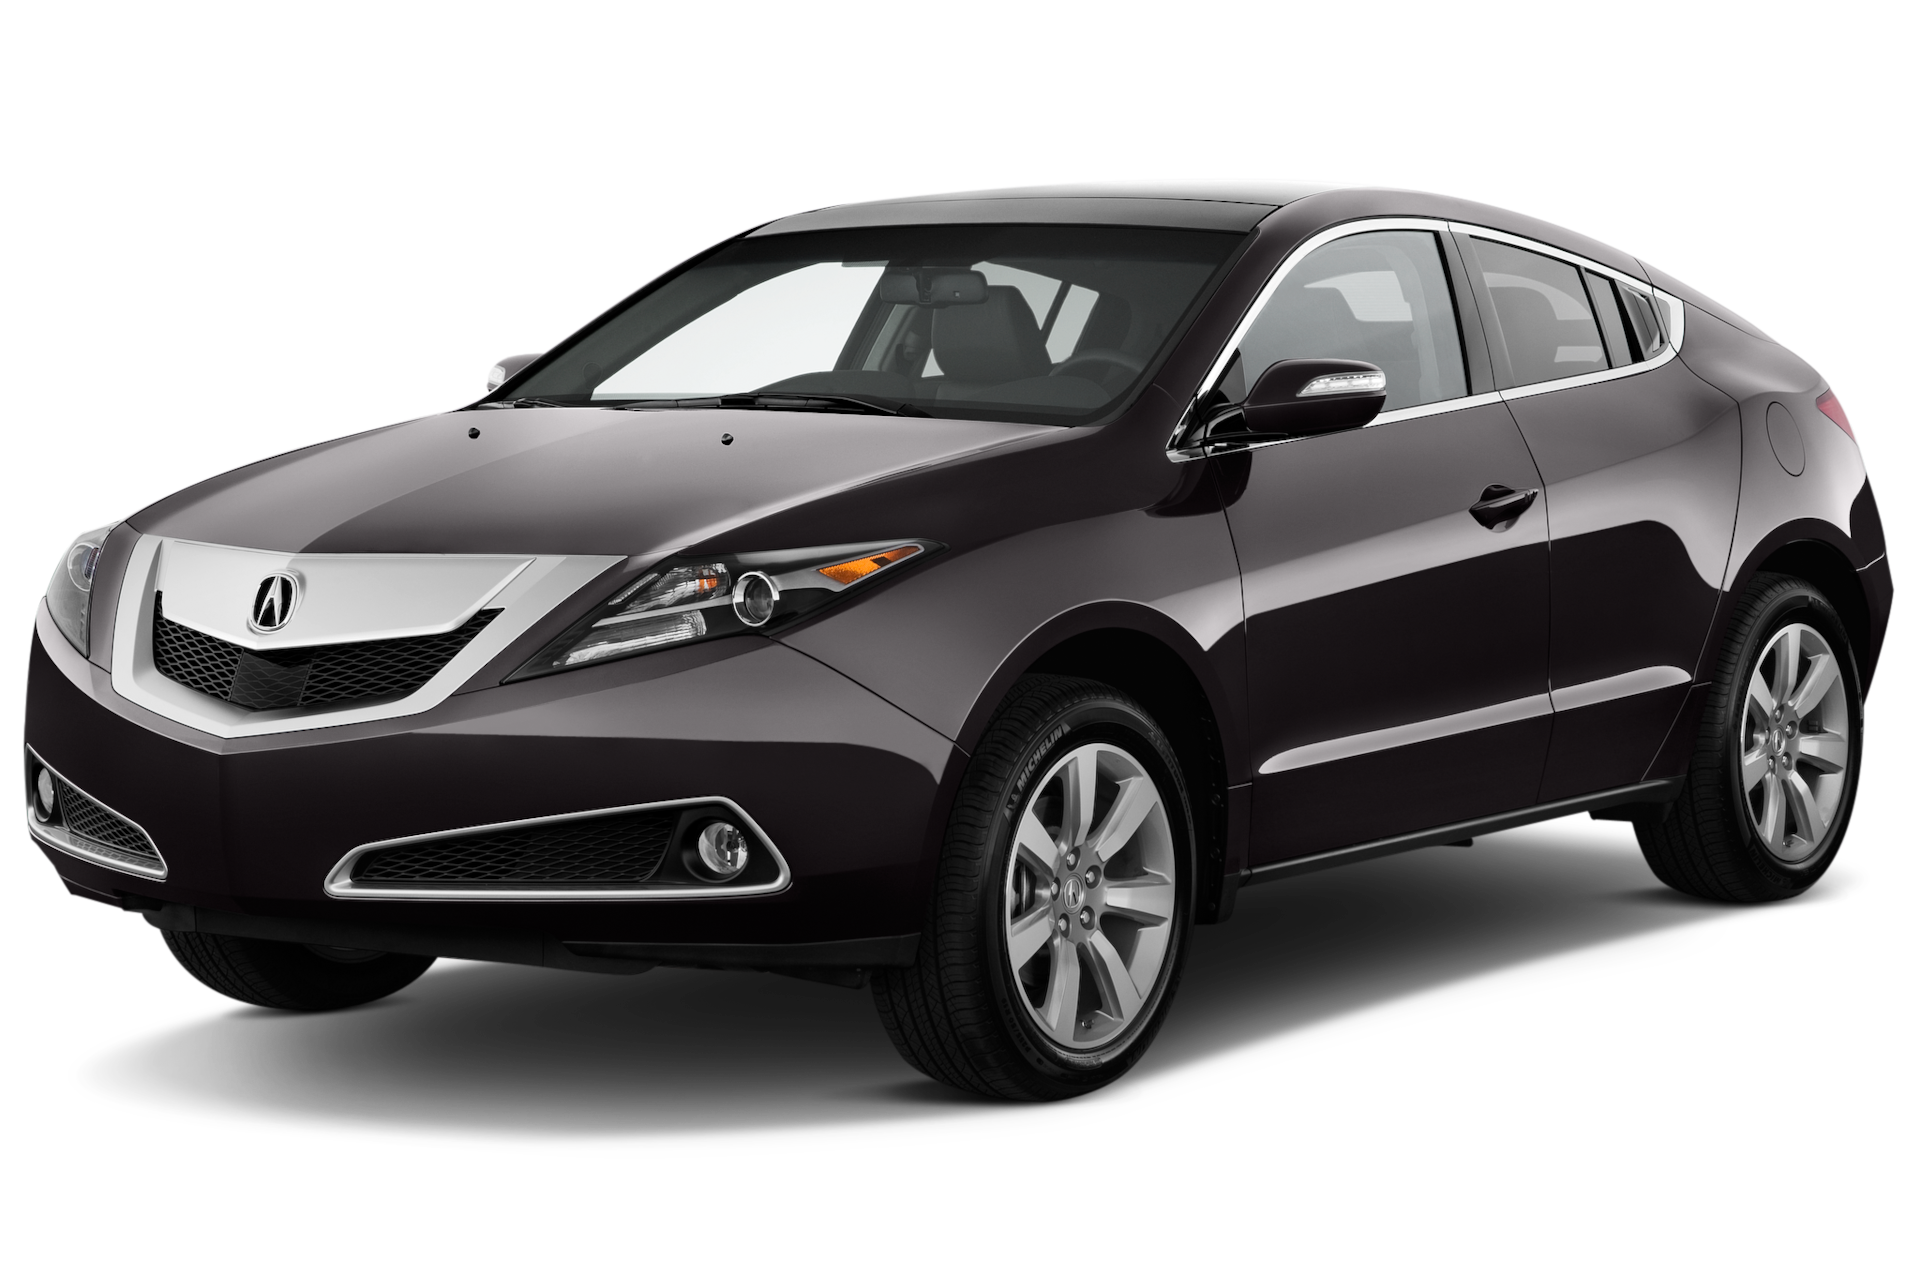 2012 Acura ZDX Prices, Reviews, and Photos - MotorTrend